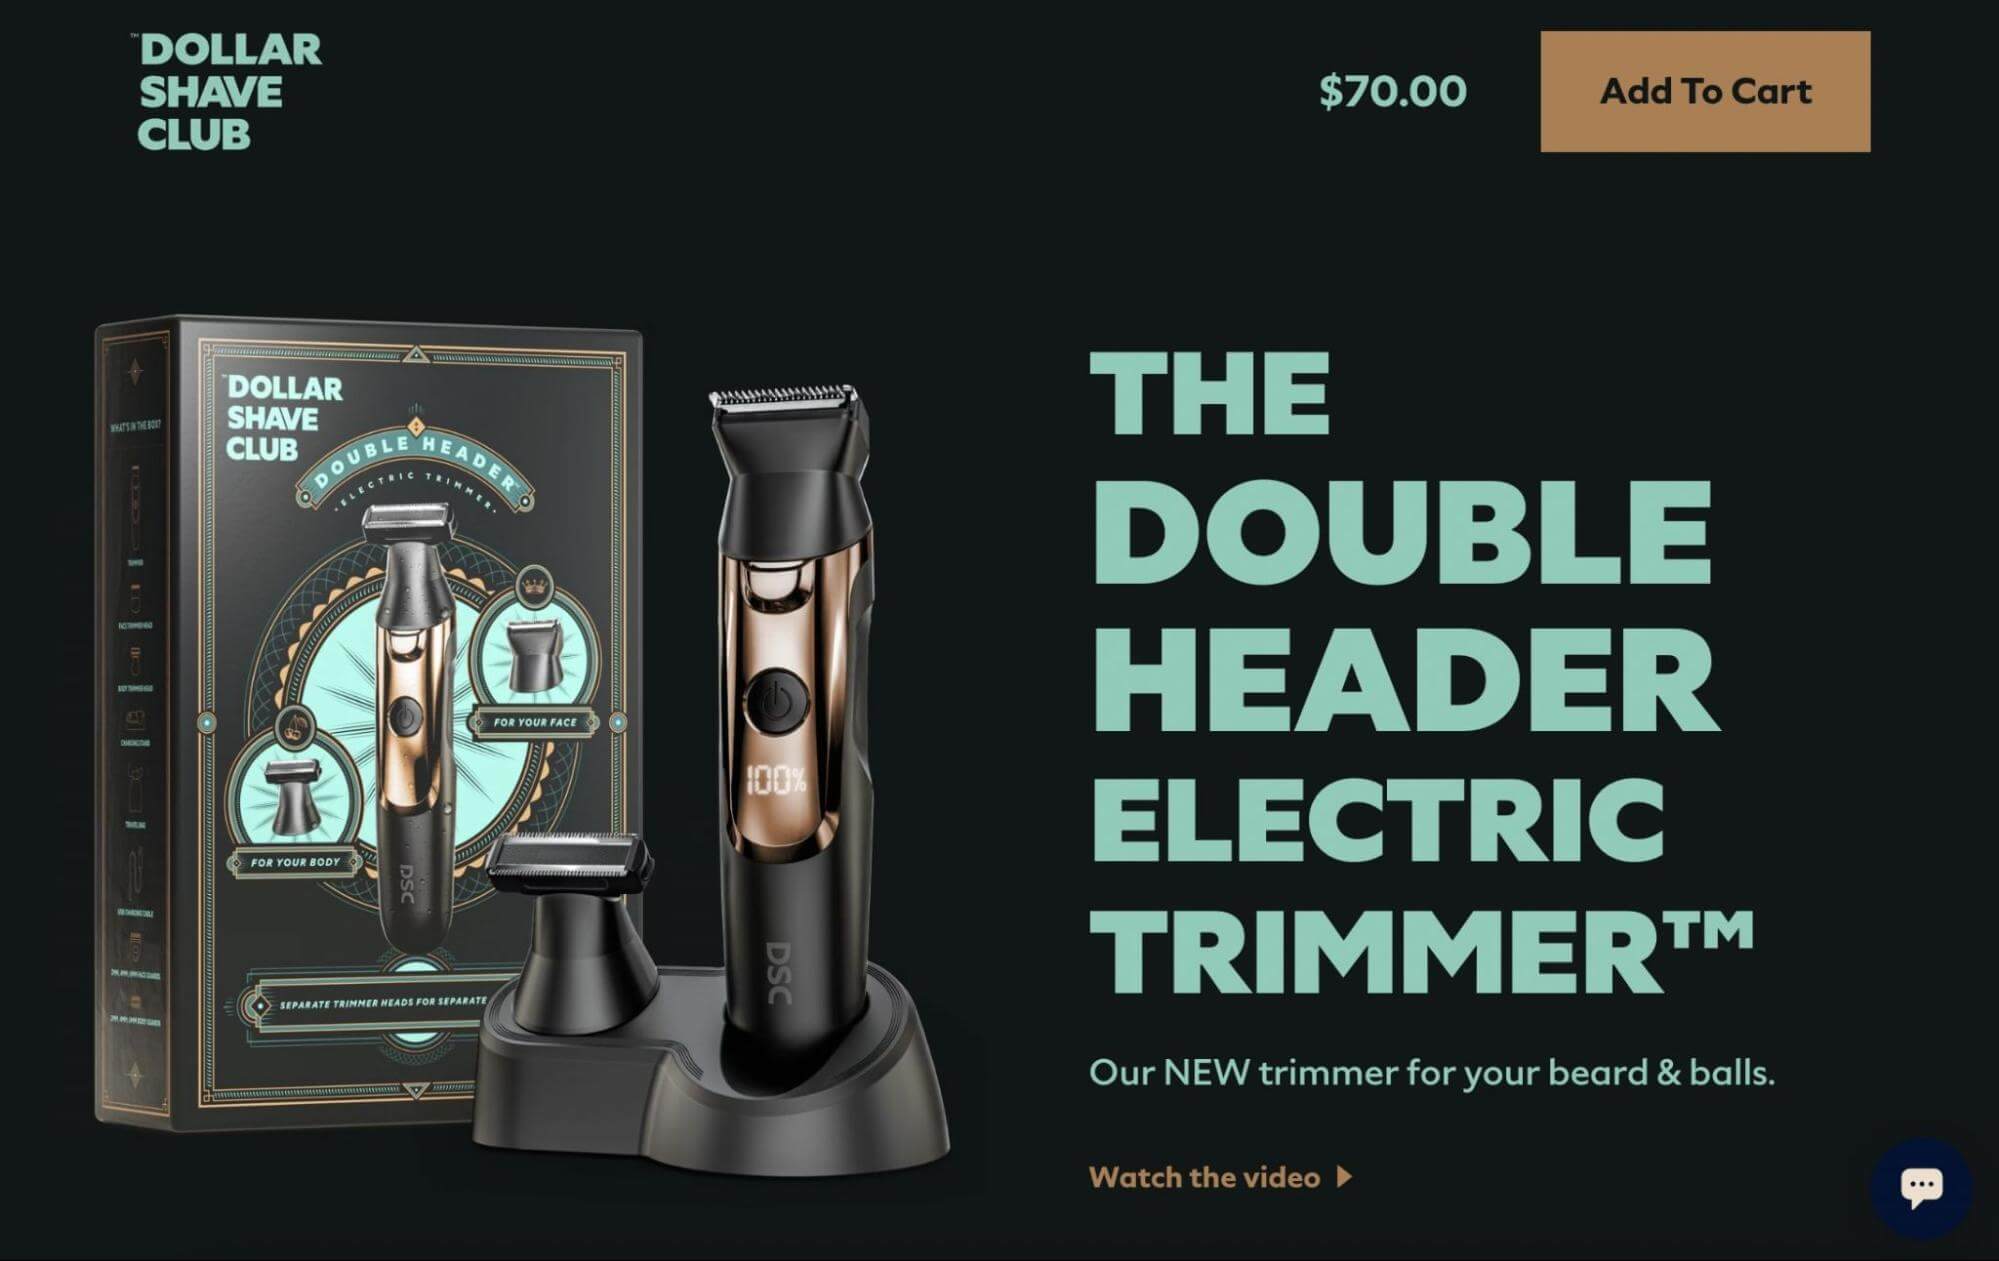 Dollar Shave Club landing page